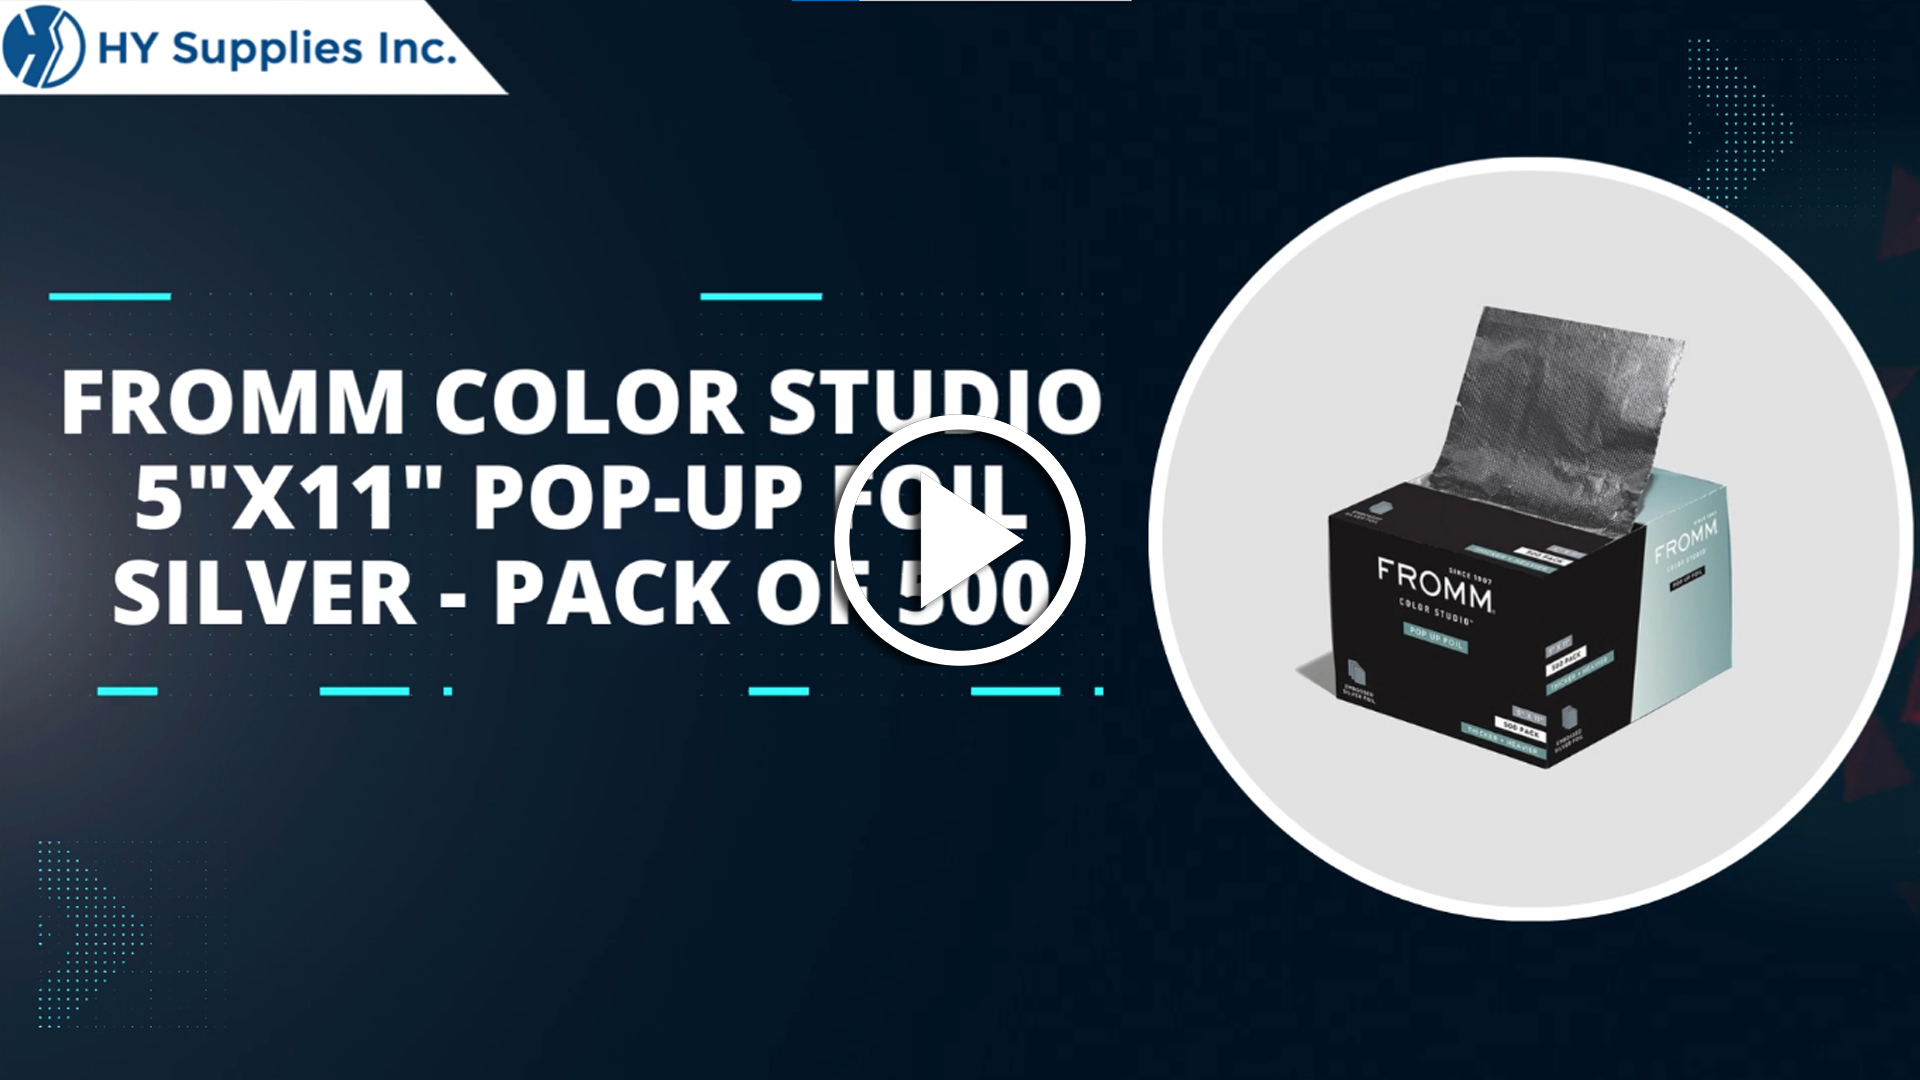 Fromm Color Studio 5""X11"" Pop-Up Foil Silver - Pack of 500